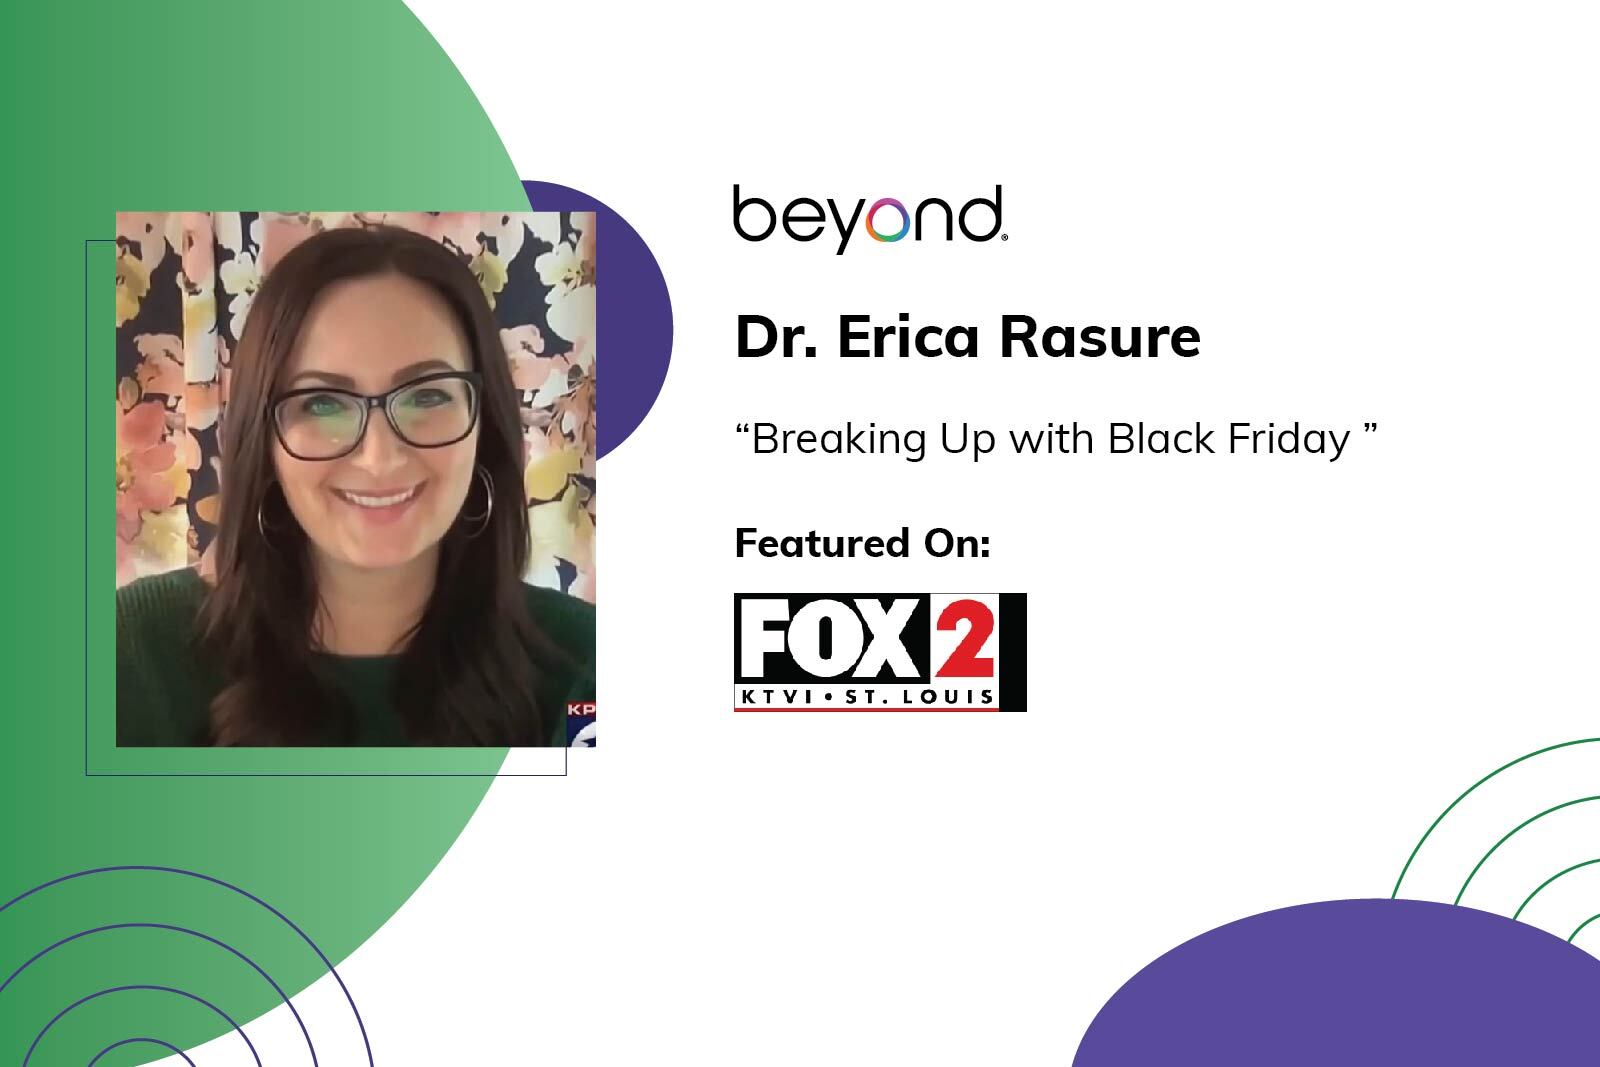 Dr. Erika Rasure discusses Black Friday on FOX2 in St. Louis